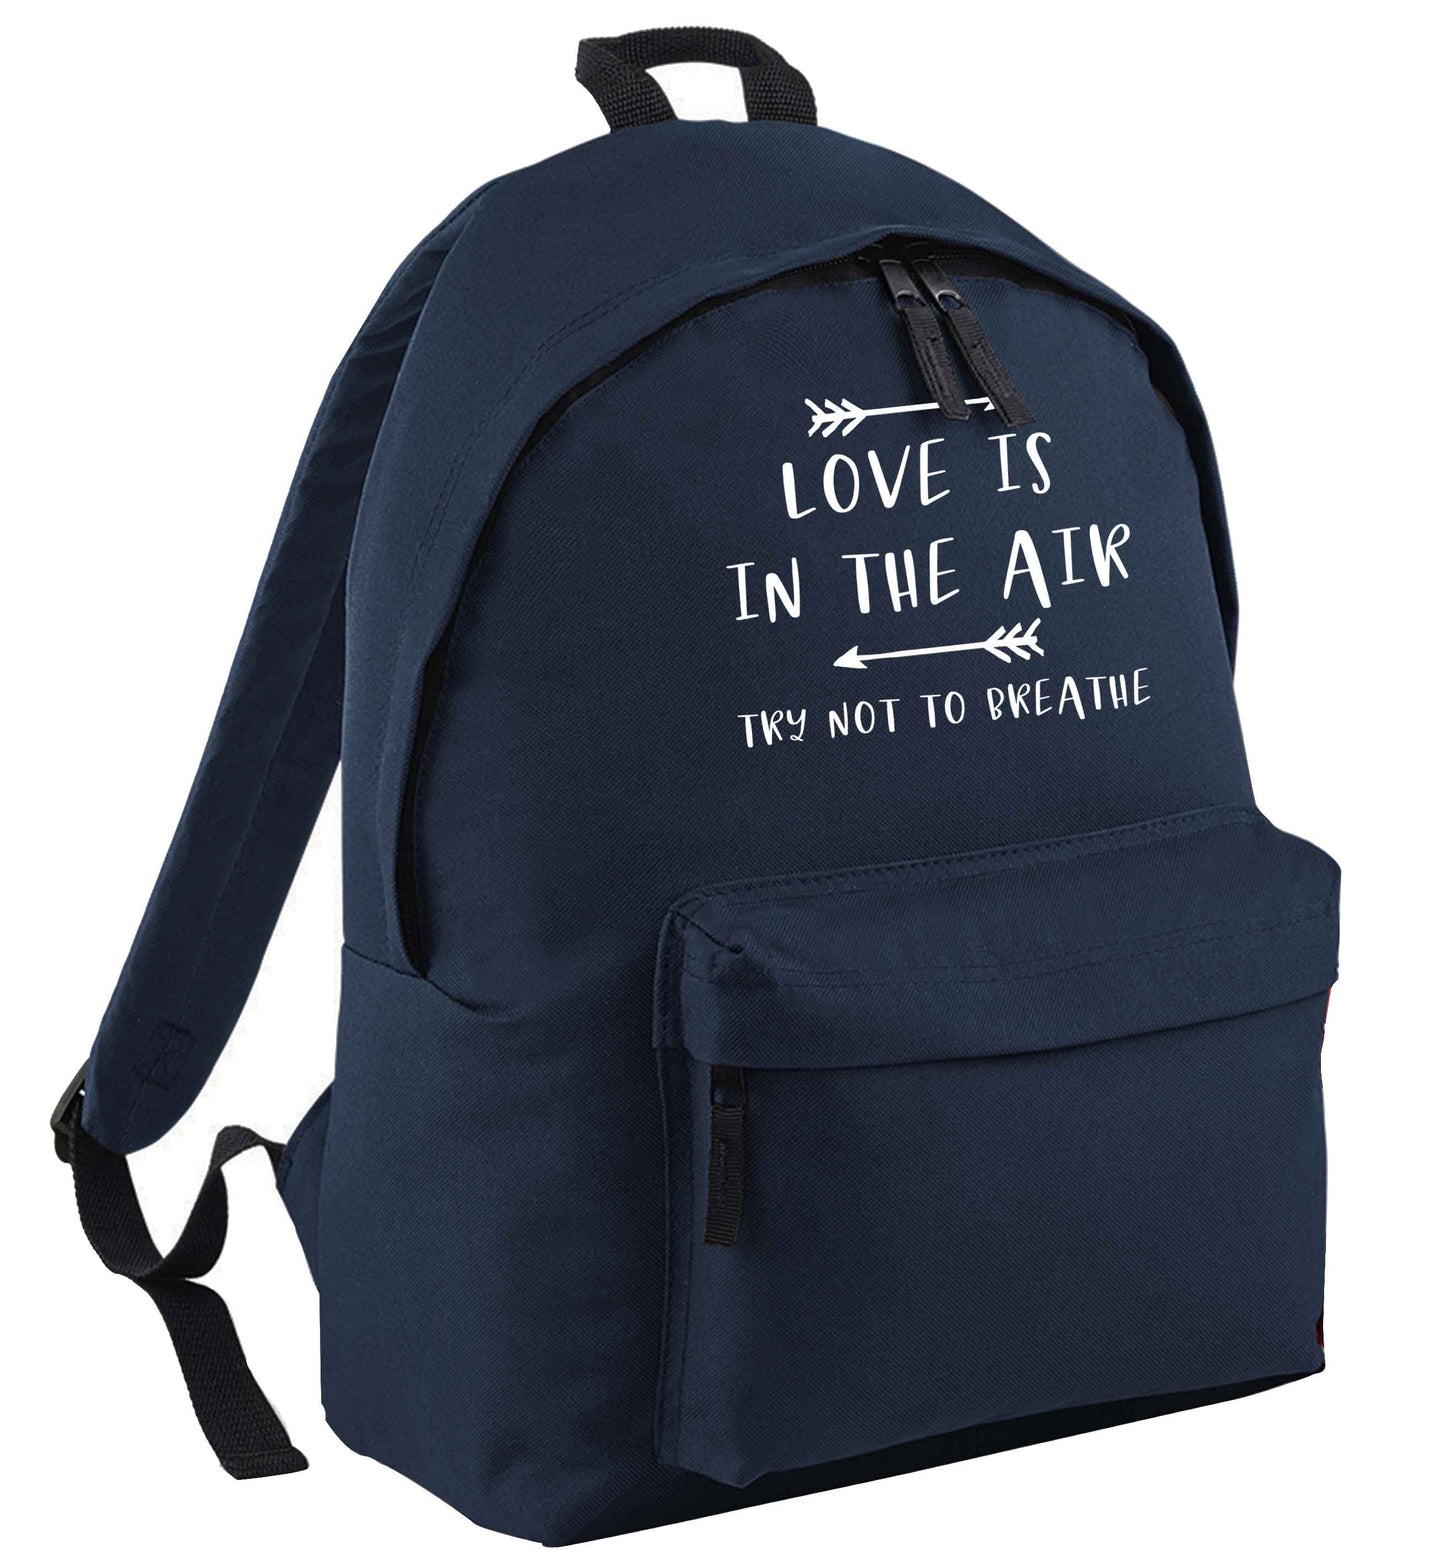 Love is in the air try not to breathe navy adults backpack